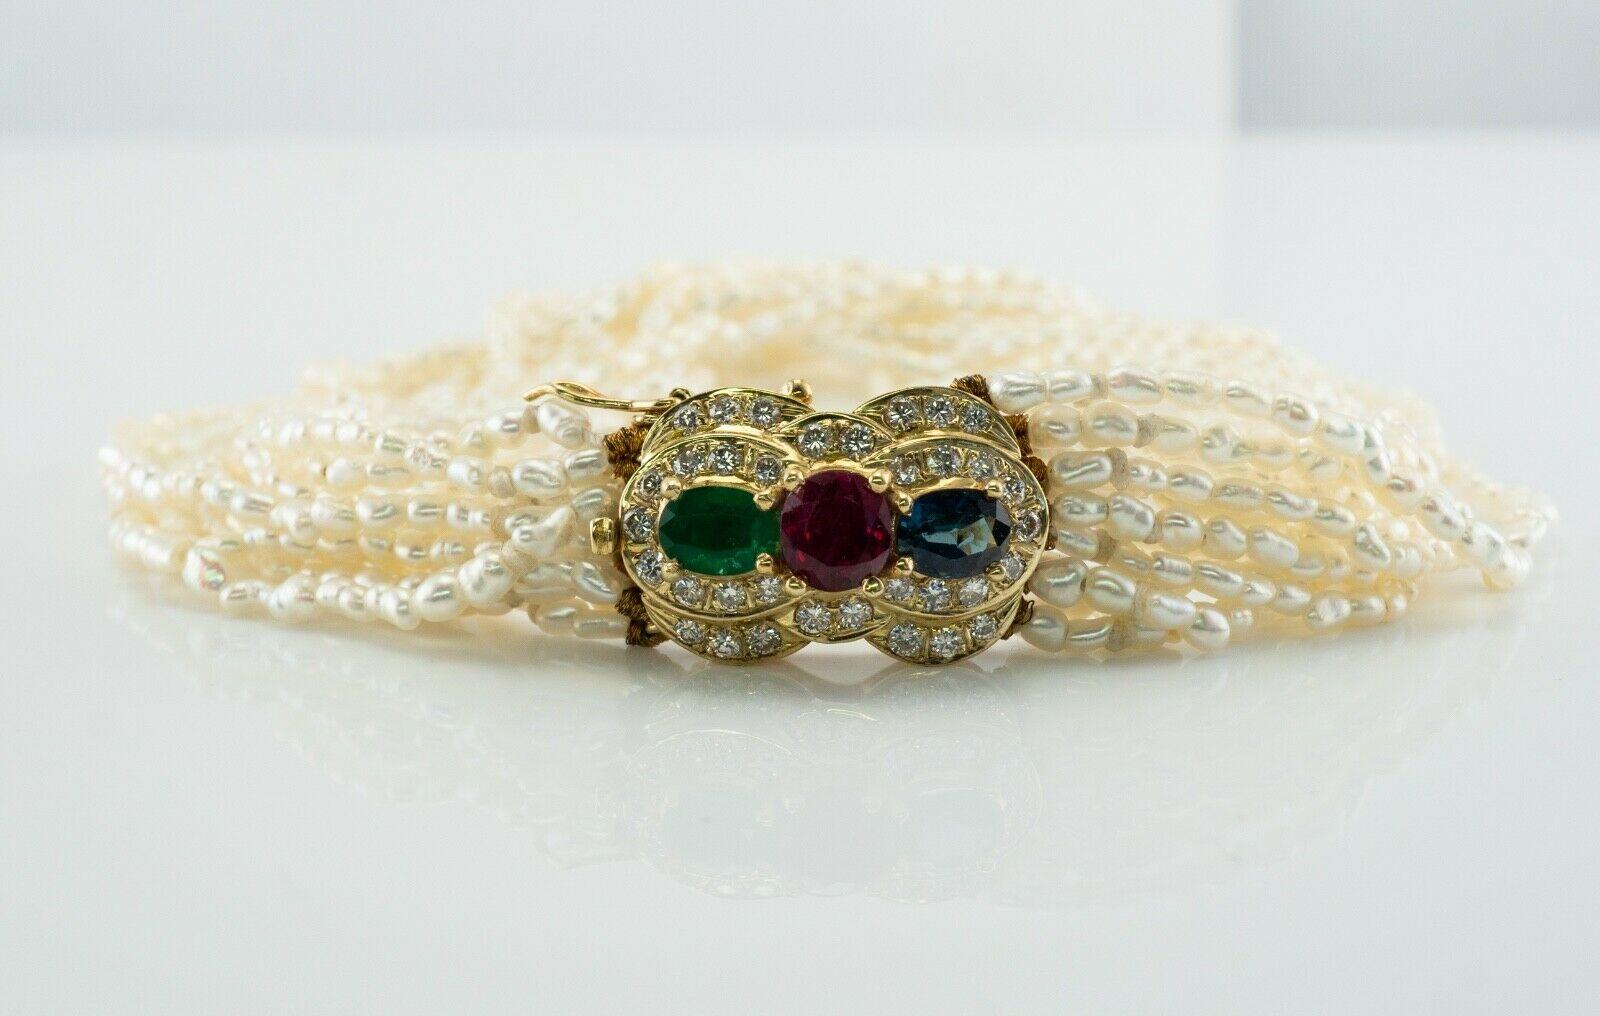 This pretty vintage bracelet is set with natural freshwater seed pearls with a solid 14K Yellow gold clasp. The clasp holds Natural Earth-mined Ruby in the center (5mm x 3.8mm = .40 carat), emerald and sapphire measuring 4mm x 3mm = .50 total for